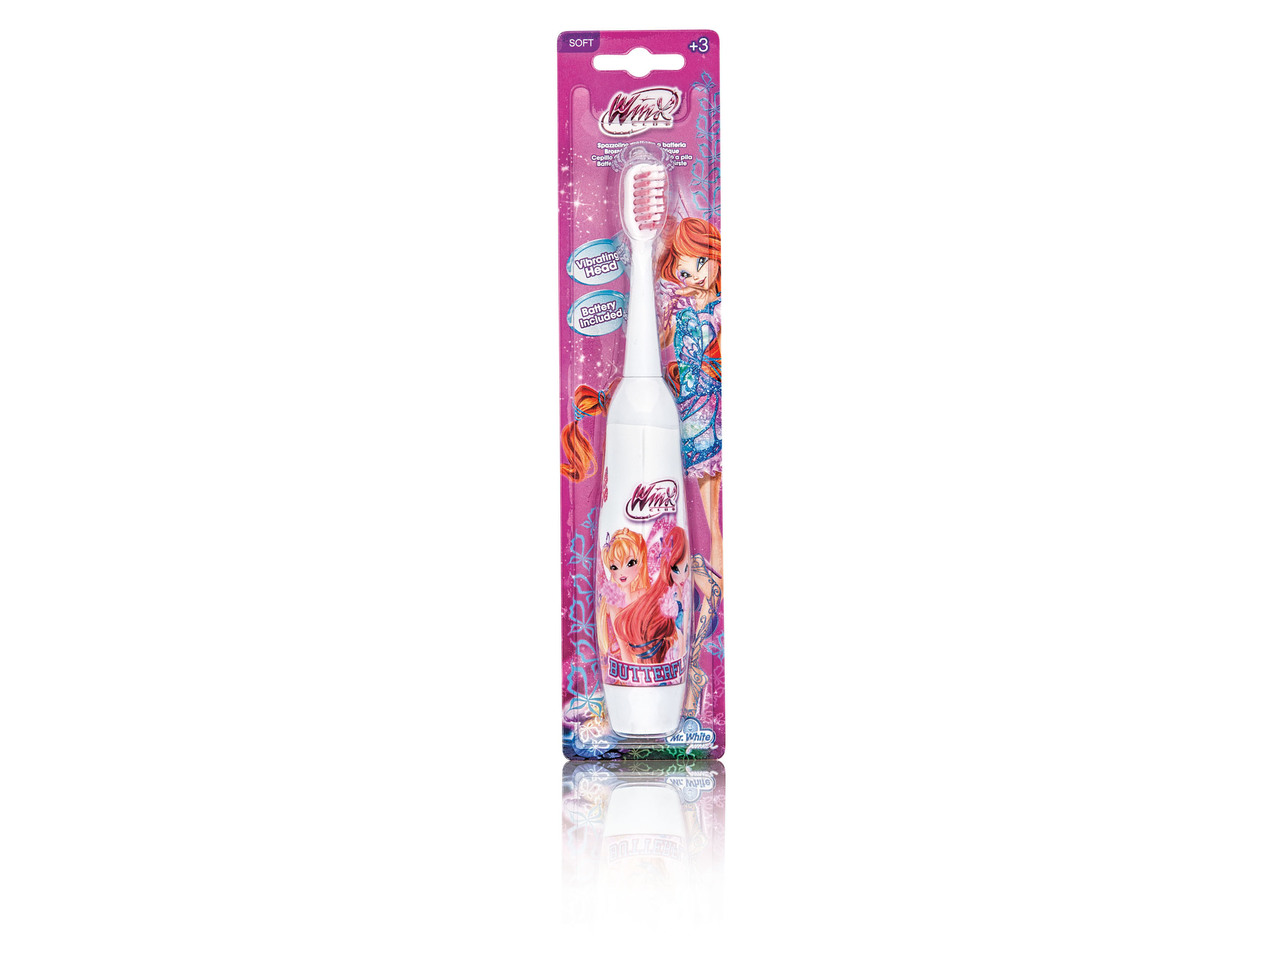 "Star Wars", "Hello Kitty" or "Winx" Electric Toothbrush